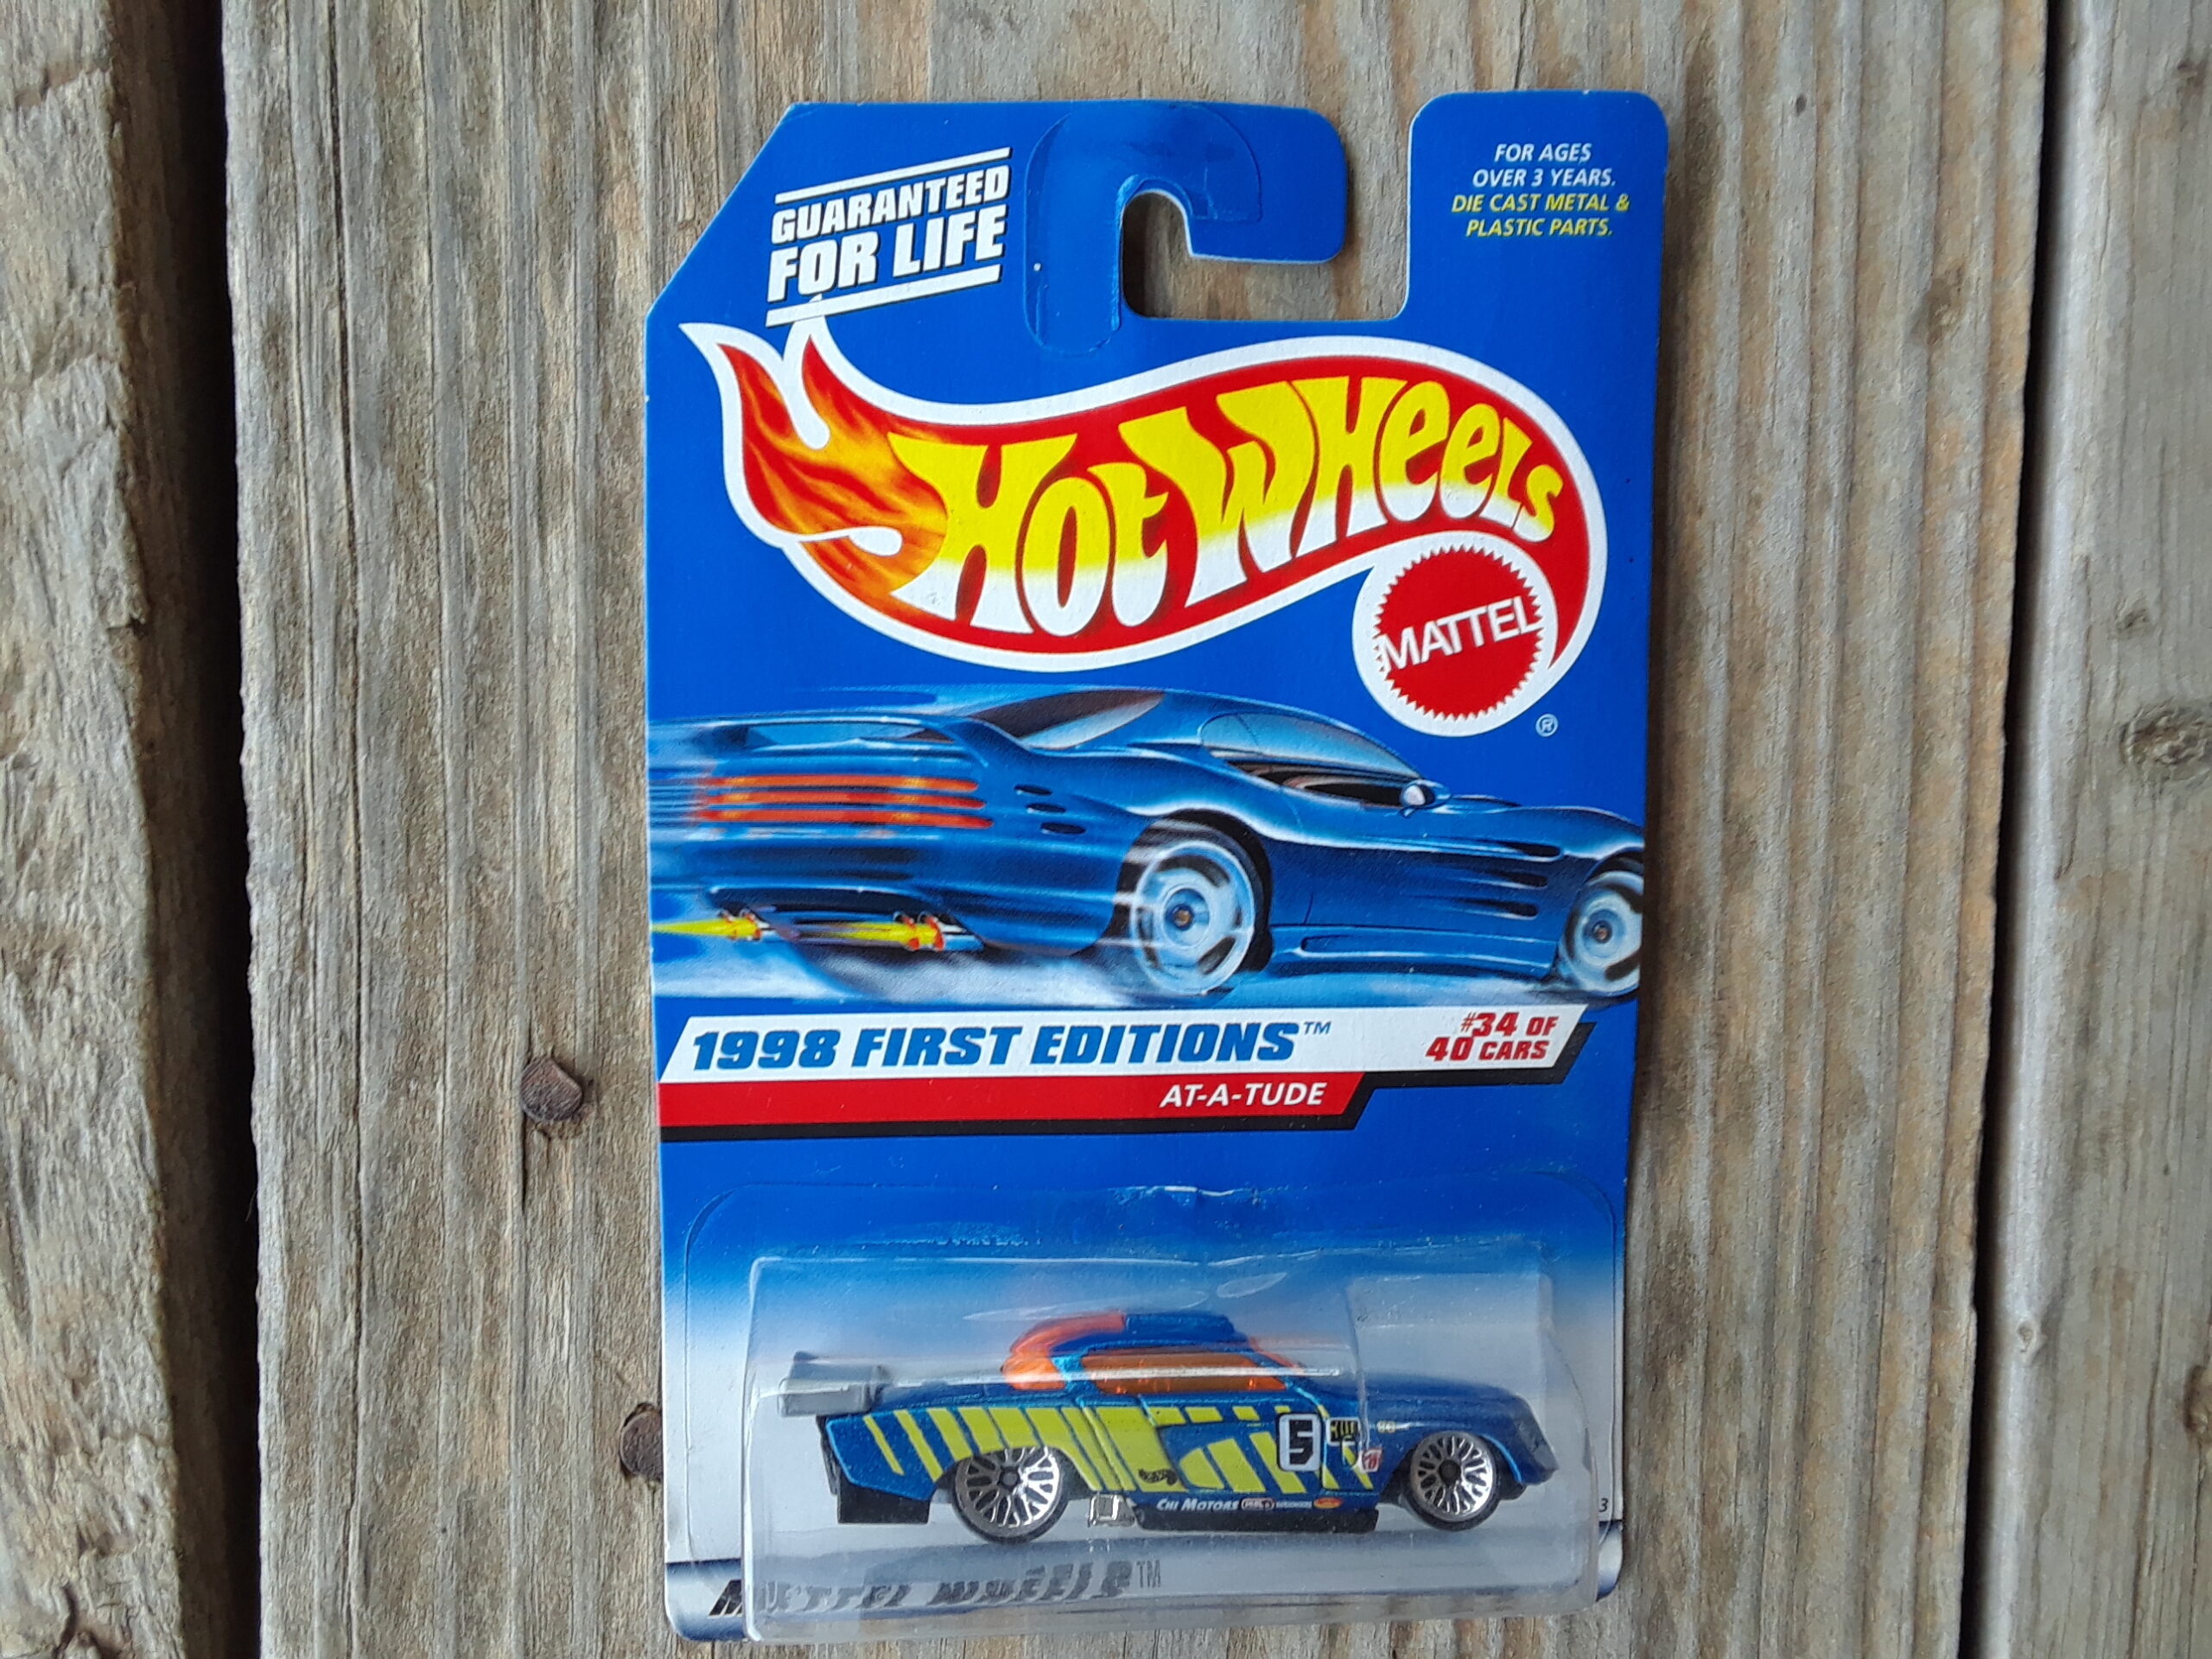 Hot Wheels 1998 First Editions AT-A-TUDE